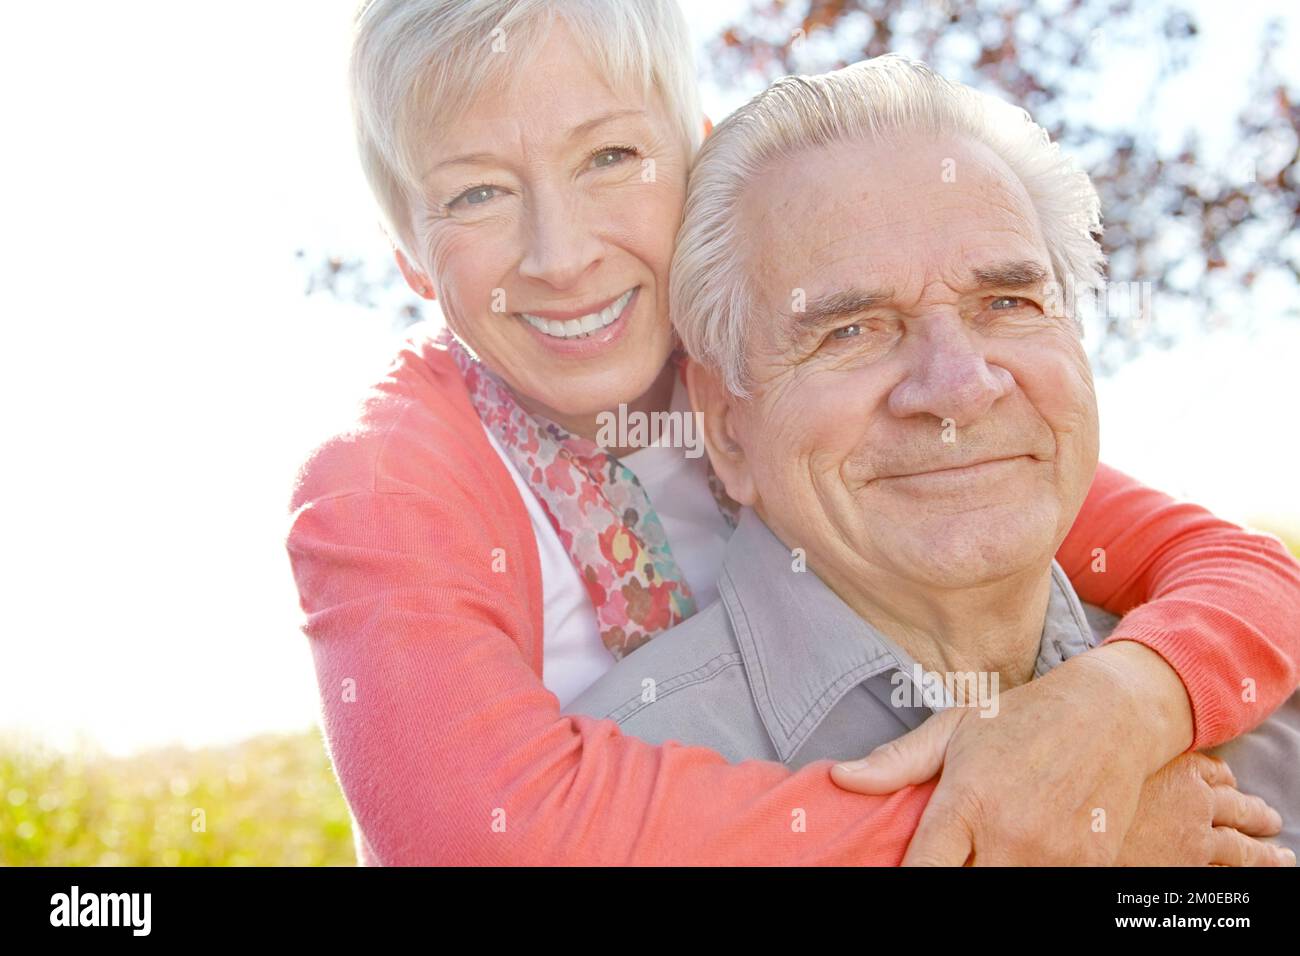 Cherishing every moment together. A mature woman embracing her husband. Stock Photo